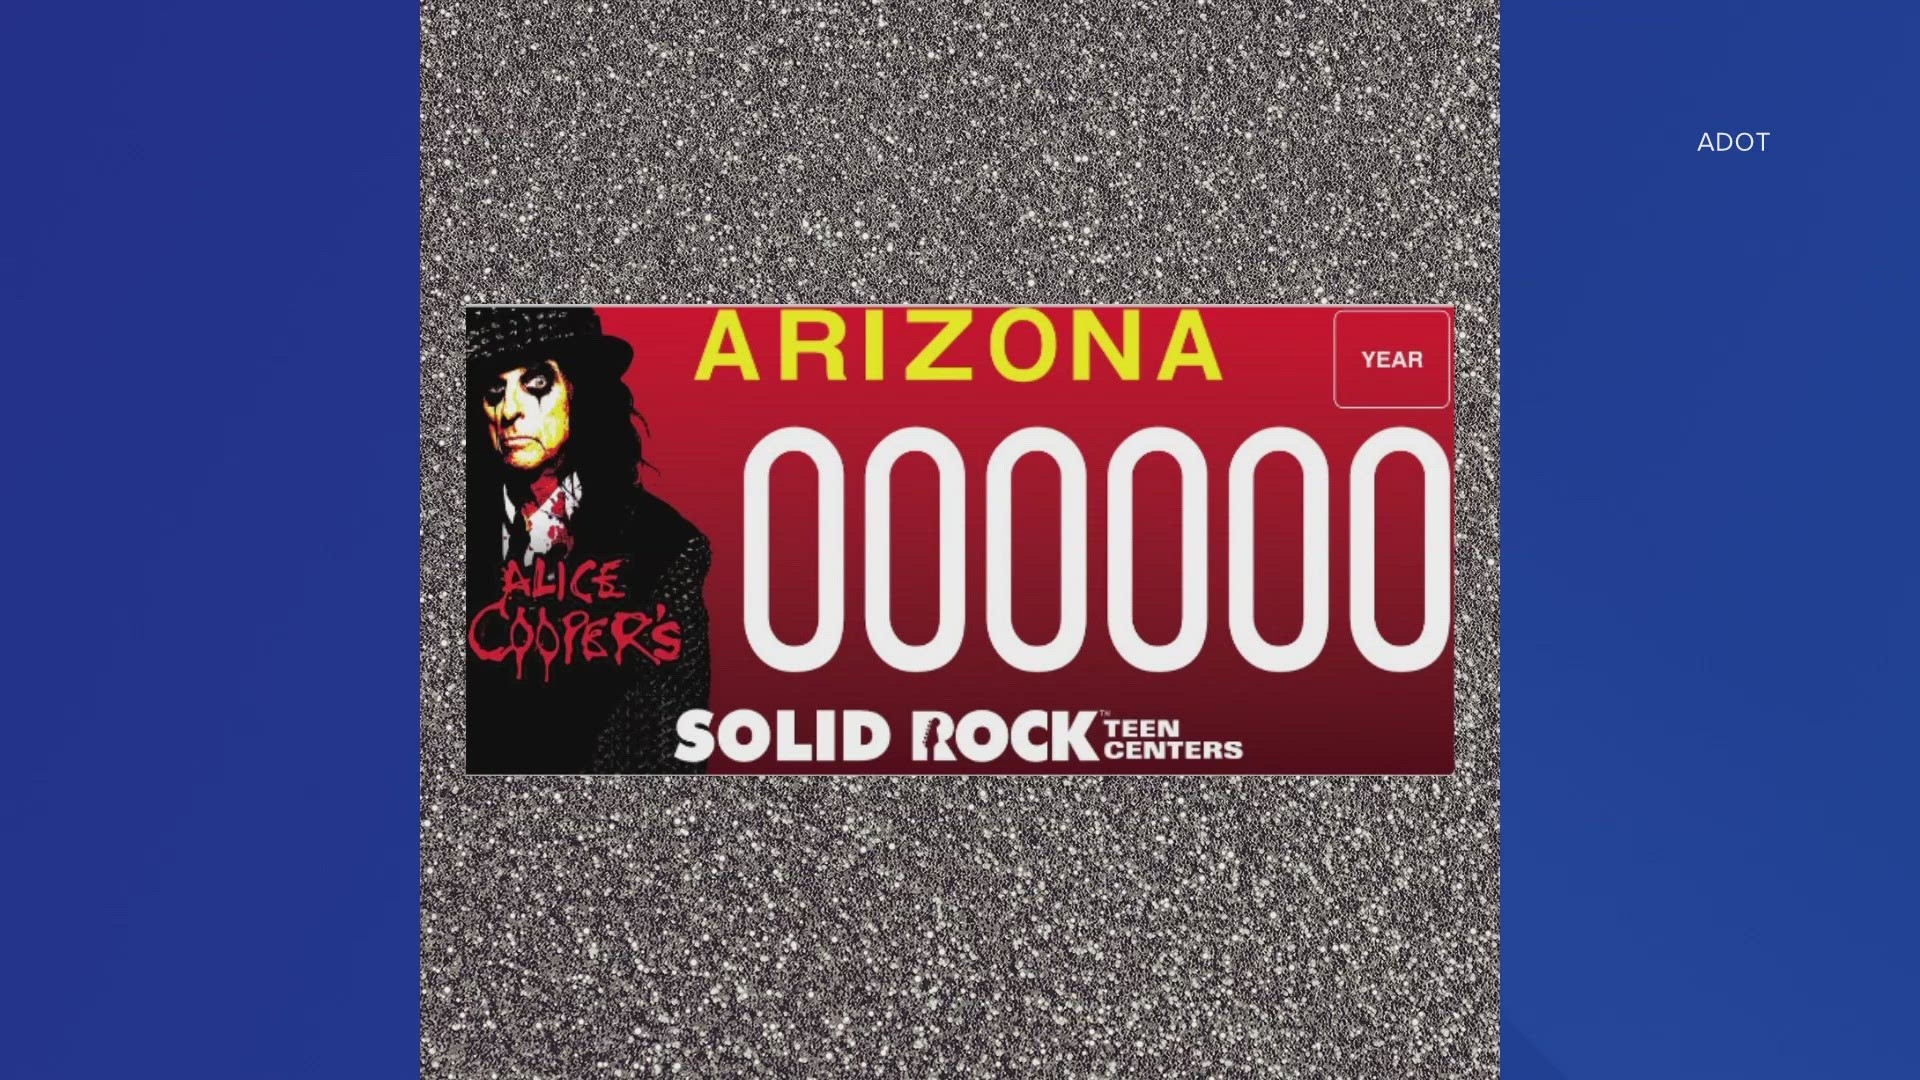 The Alice Cooper plate is one of five new specialty designs drivers in Arizona can purchase from ADOT.